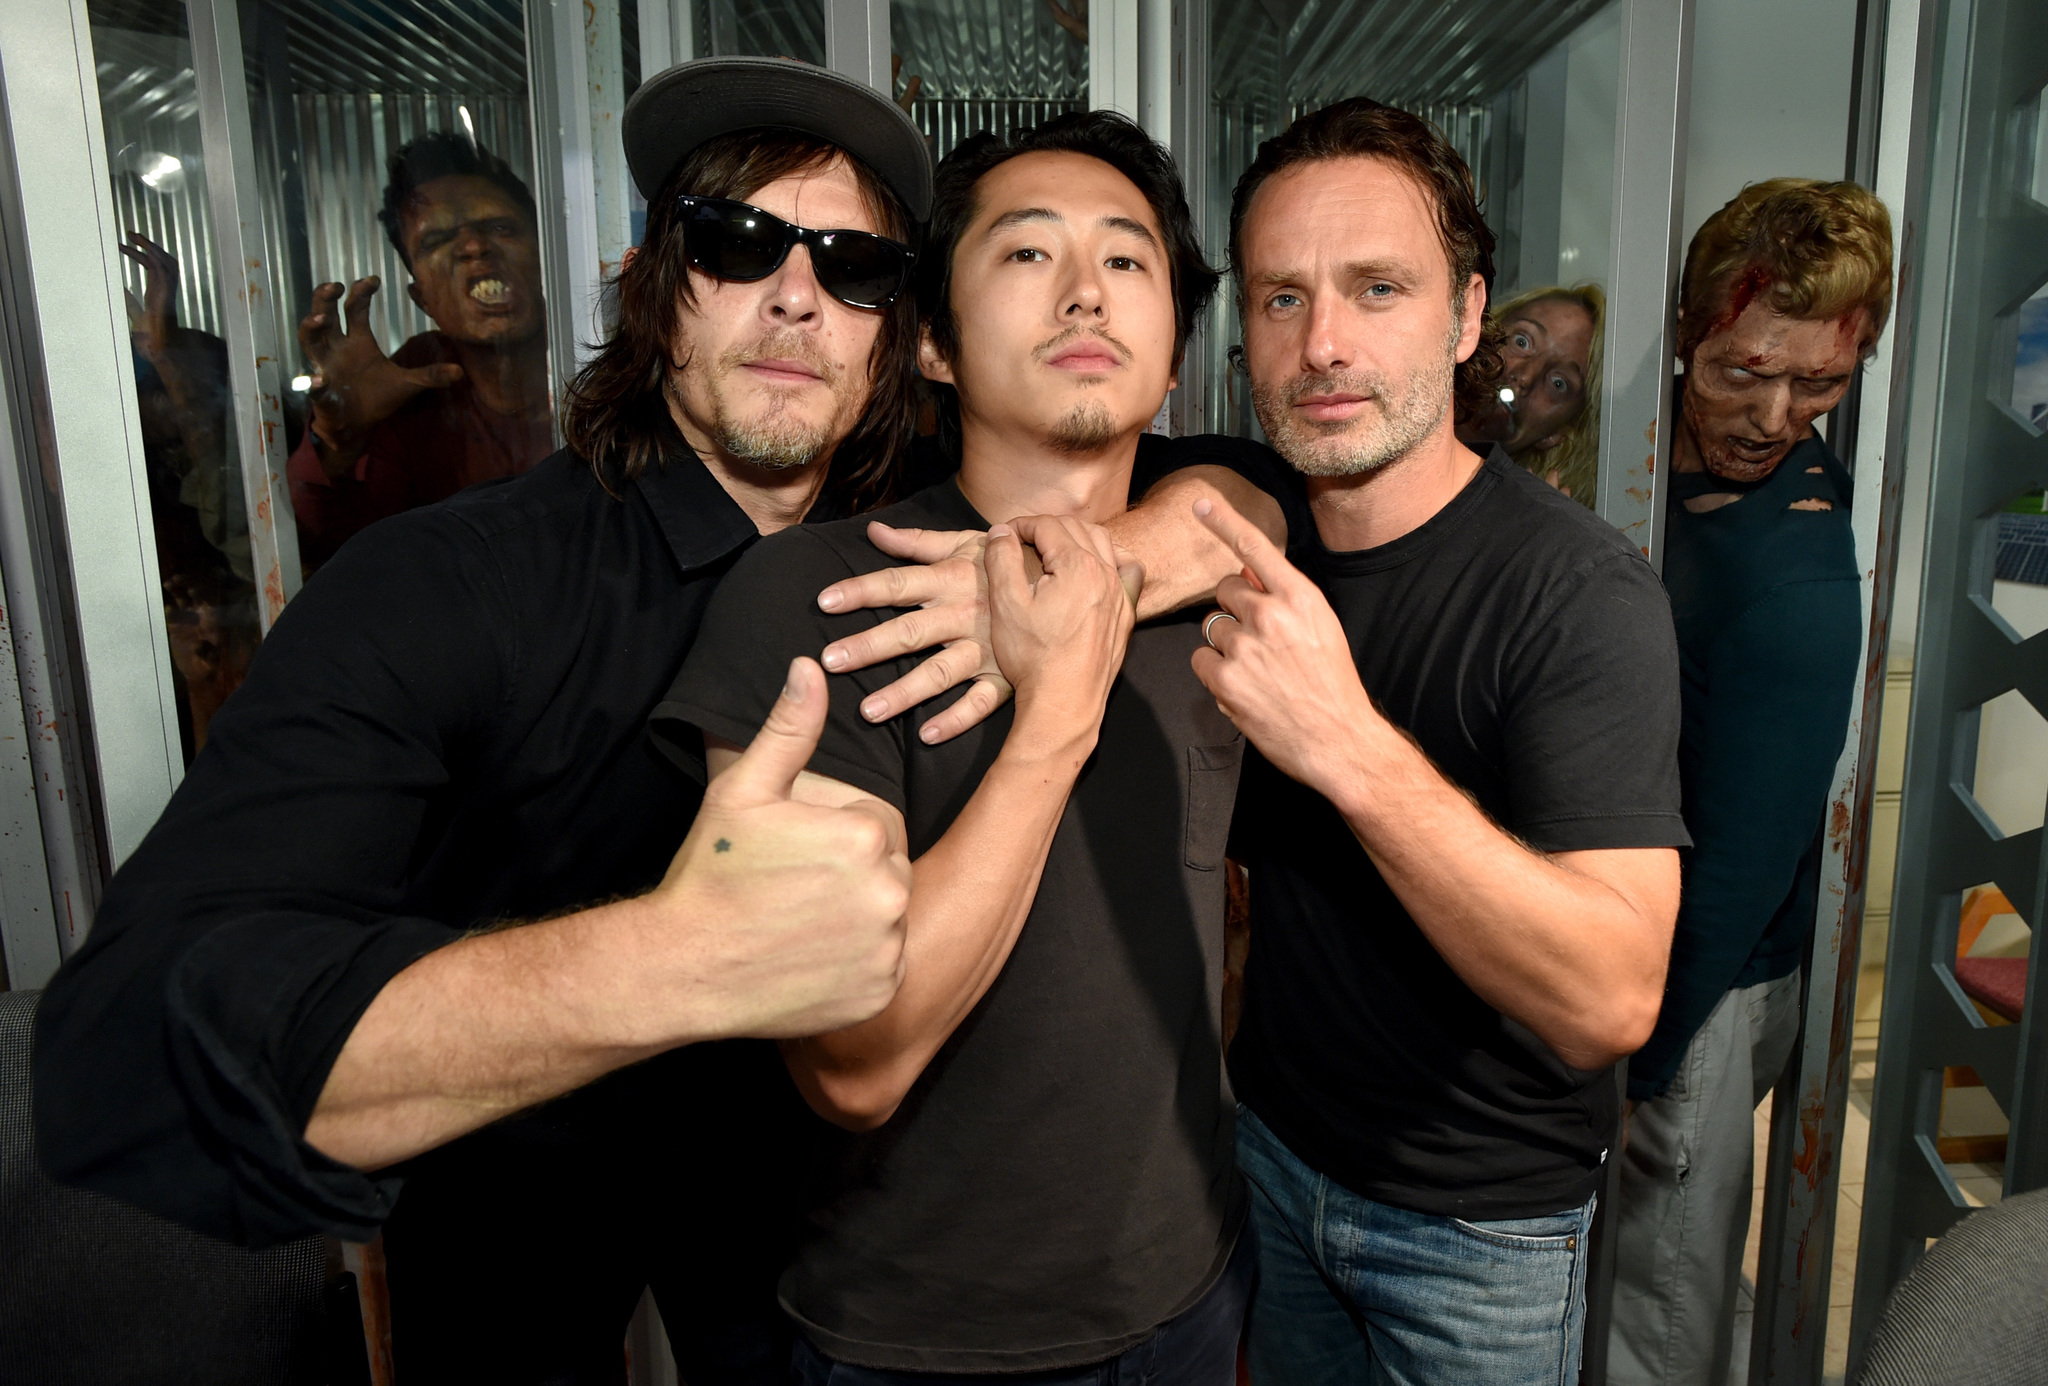 Norman Reedus, Andrew Lincoln and Steven Yeun at event of Vaikstantys numireliai (2010)